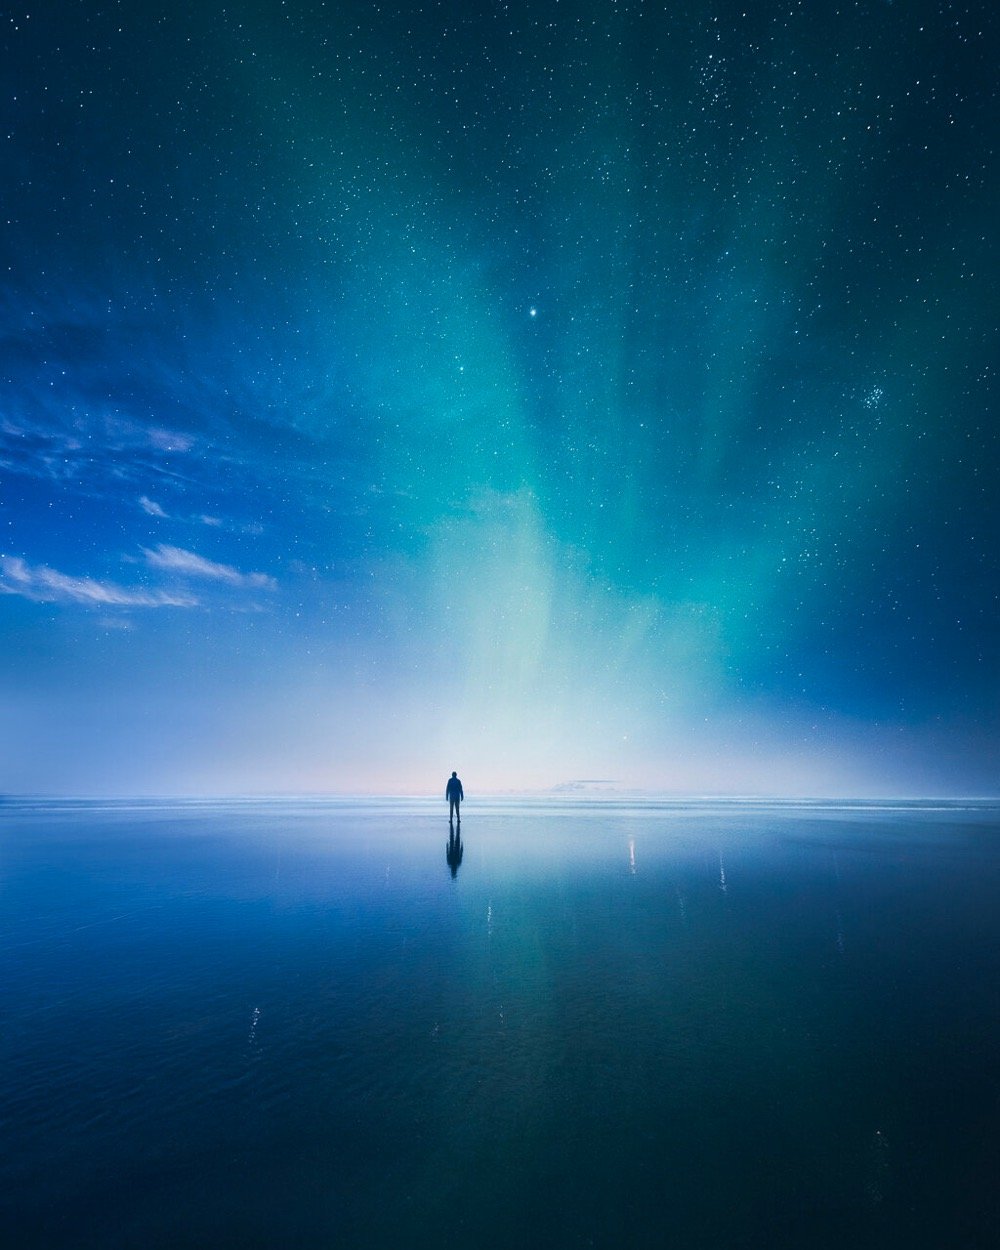 a man standing on a reflective surface under a brilliant blue night sky